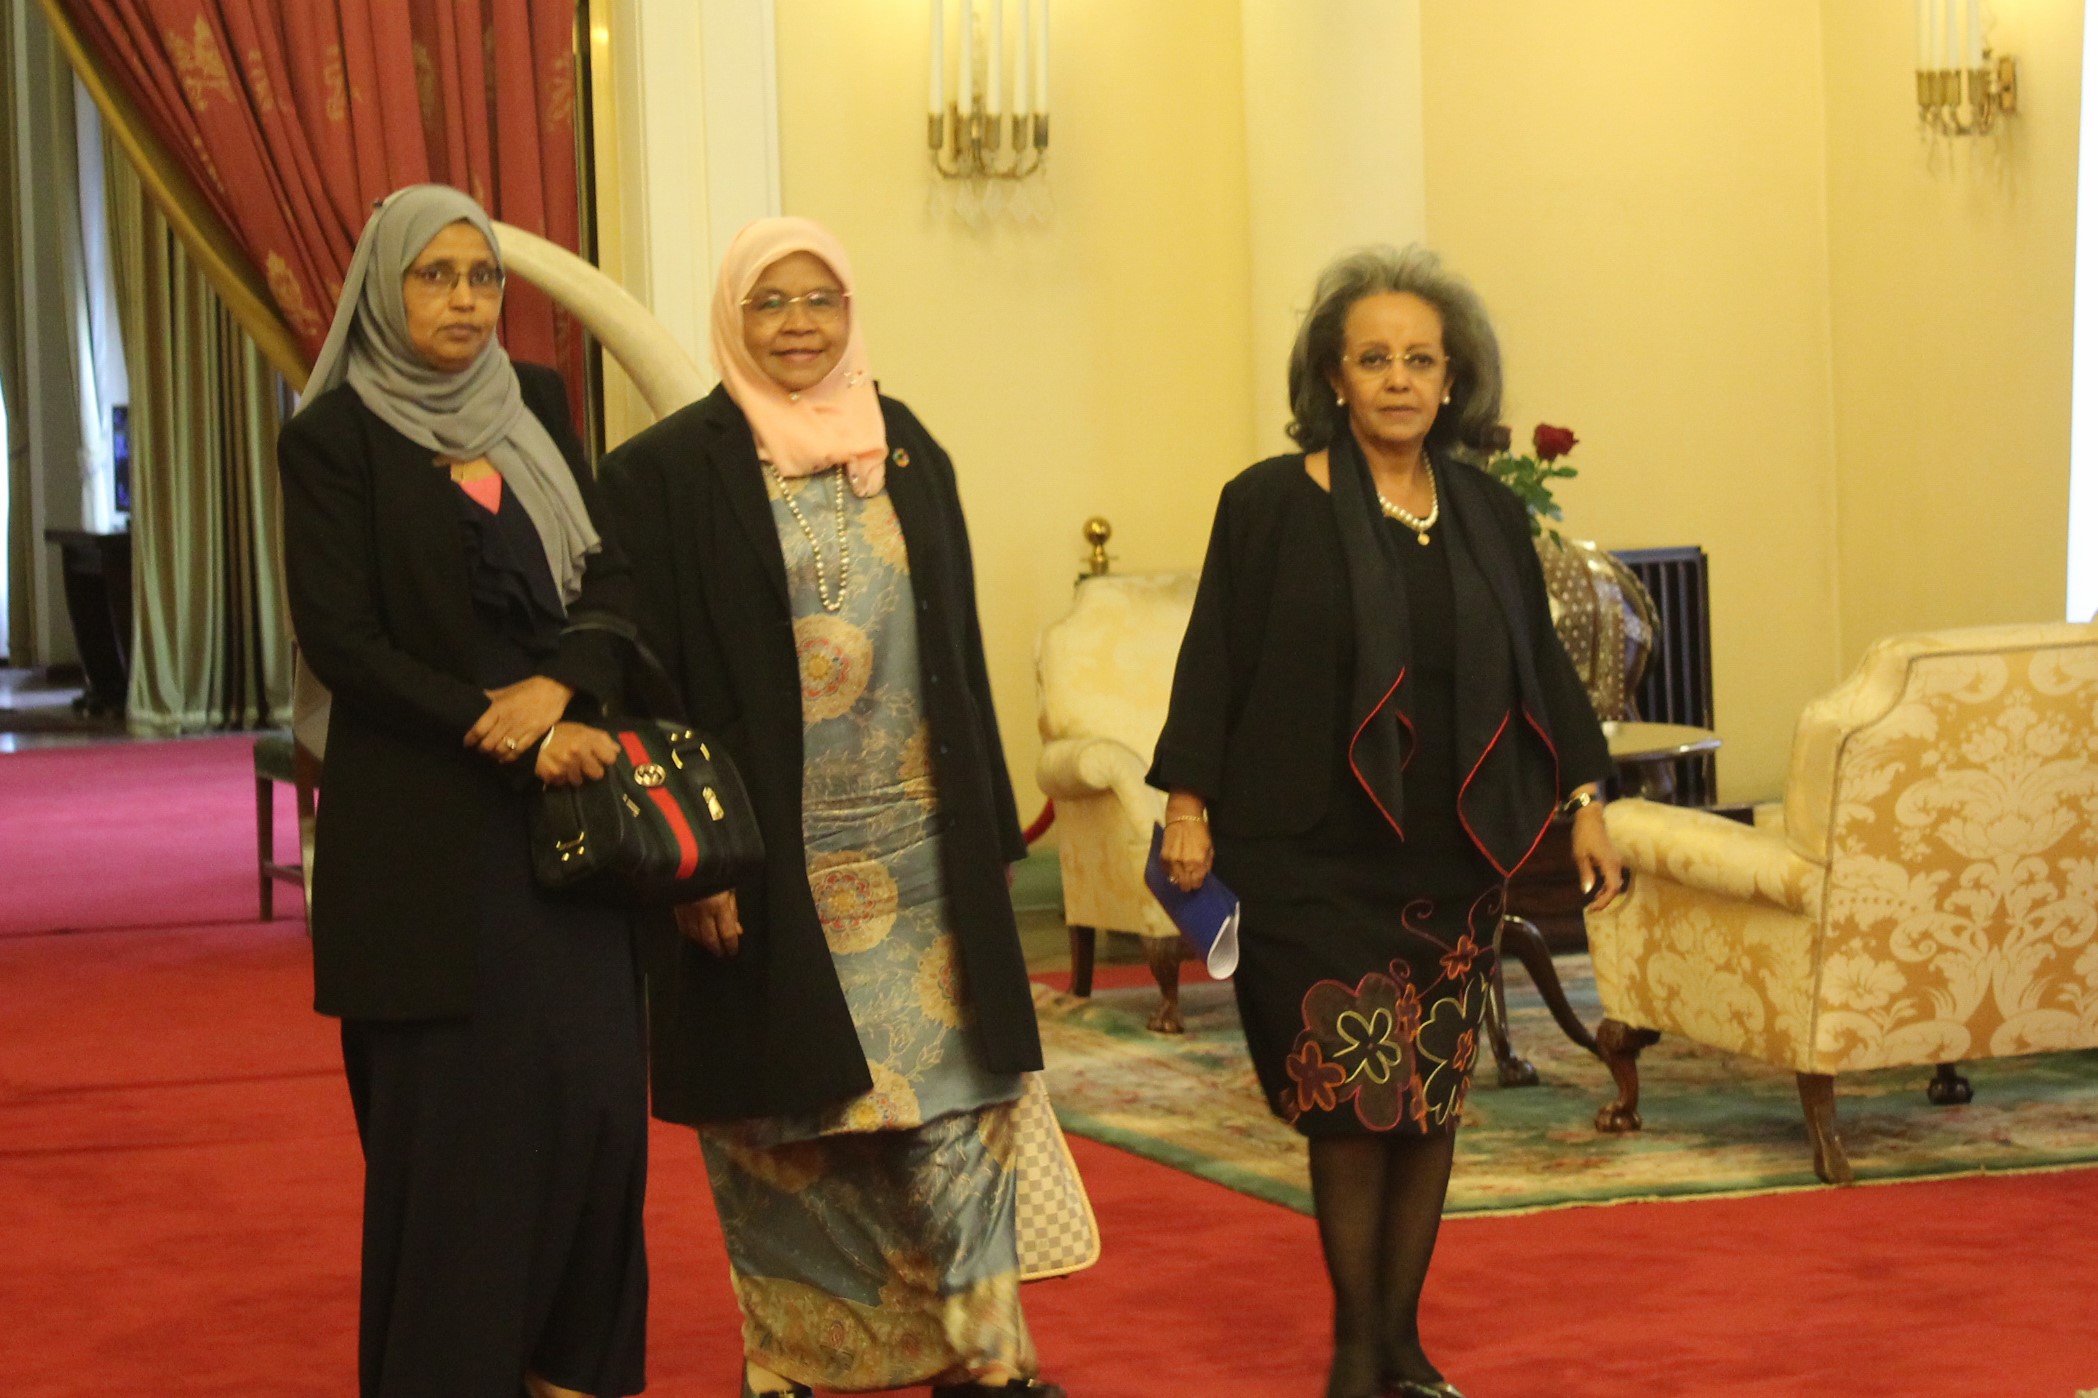 The UN-Habitat Executive Director walking with the Ethiopian President Sahle Work-Zewde and the Minister of Urban Development and Construction Aisha Mohammed in Addis Ababa.